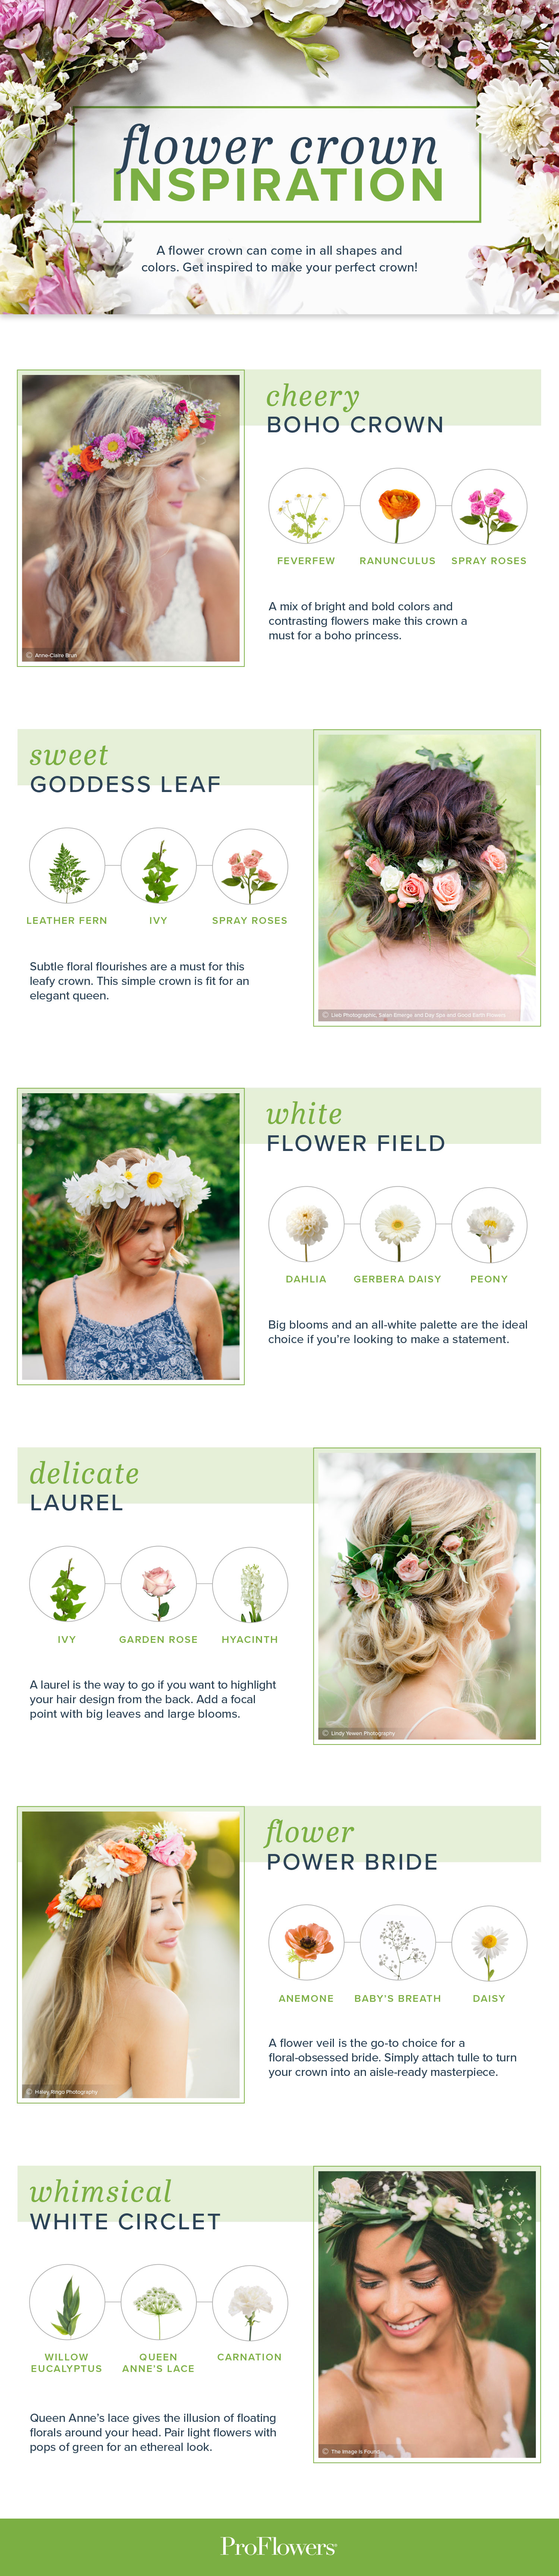 How to make a flower crown with our step-by-step guide